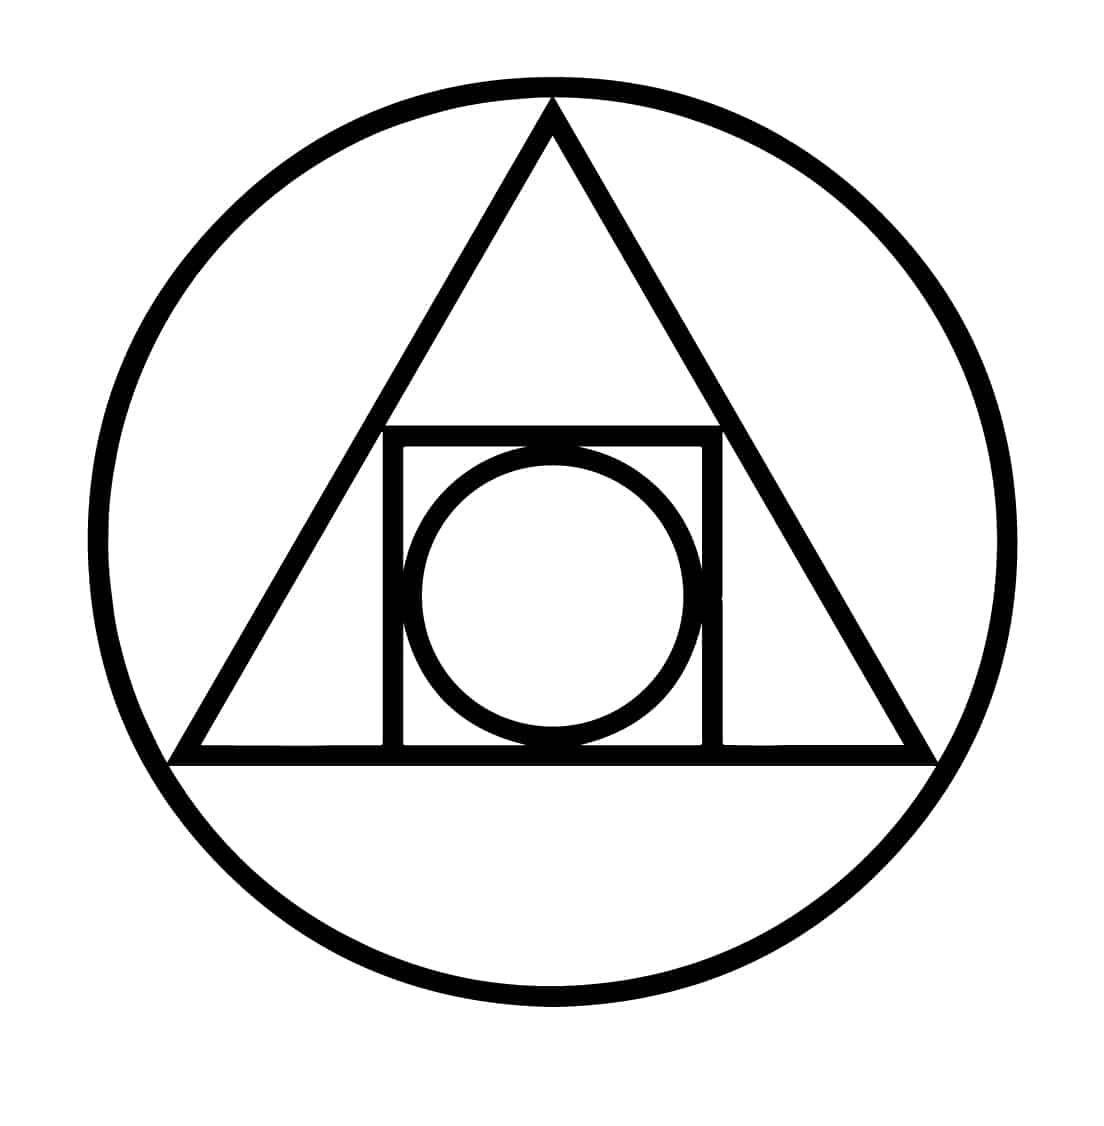 Philosophers-Stone-As-An-Alchemy-Symbol-Alchemical-Symbols-And-Their-Meanings.jpg